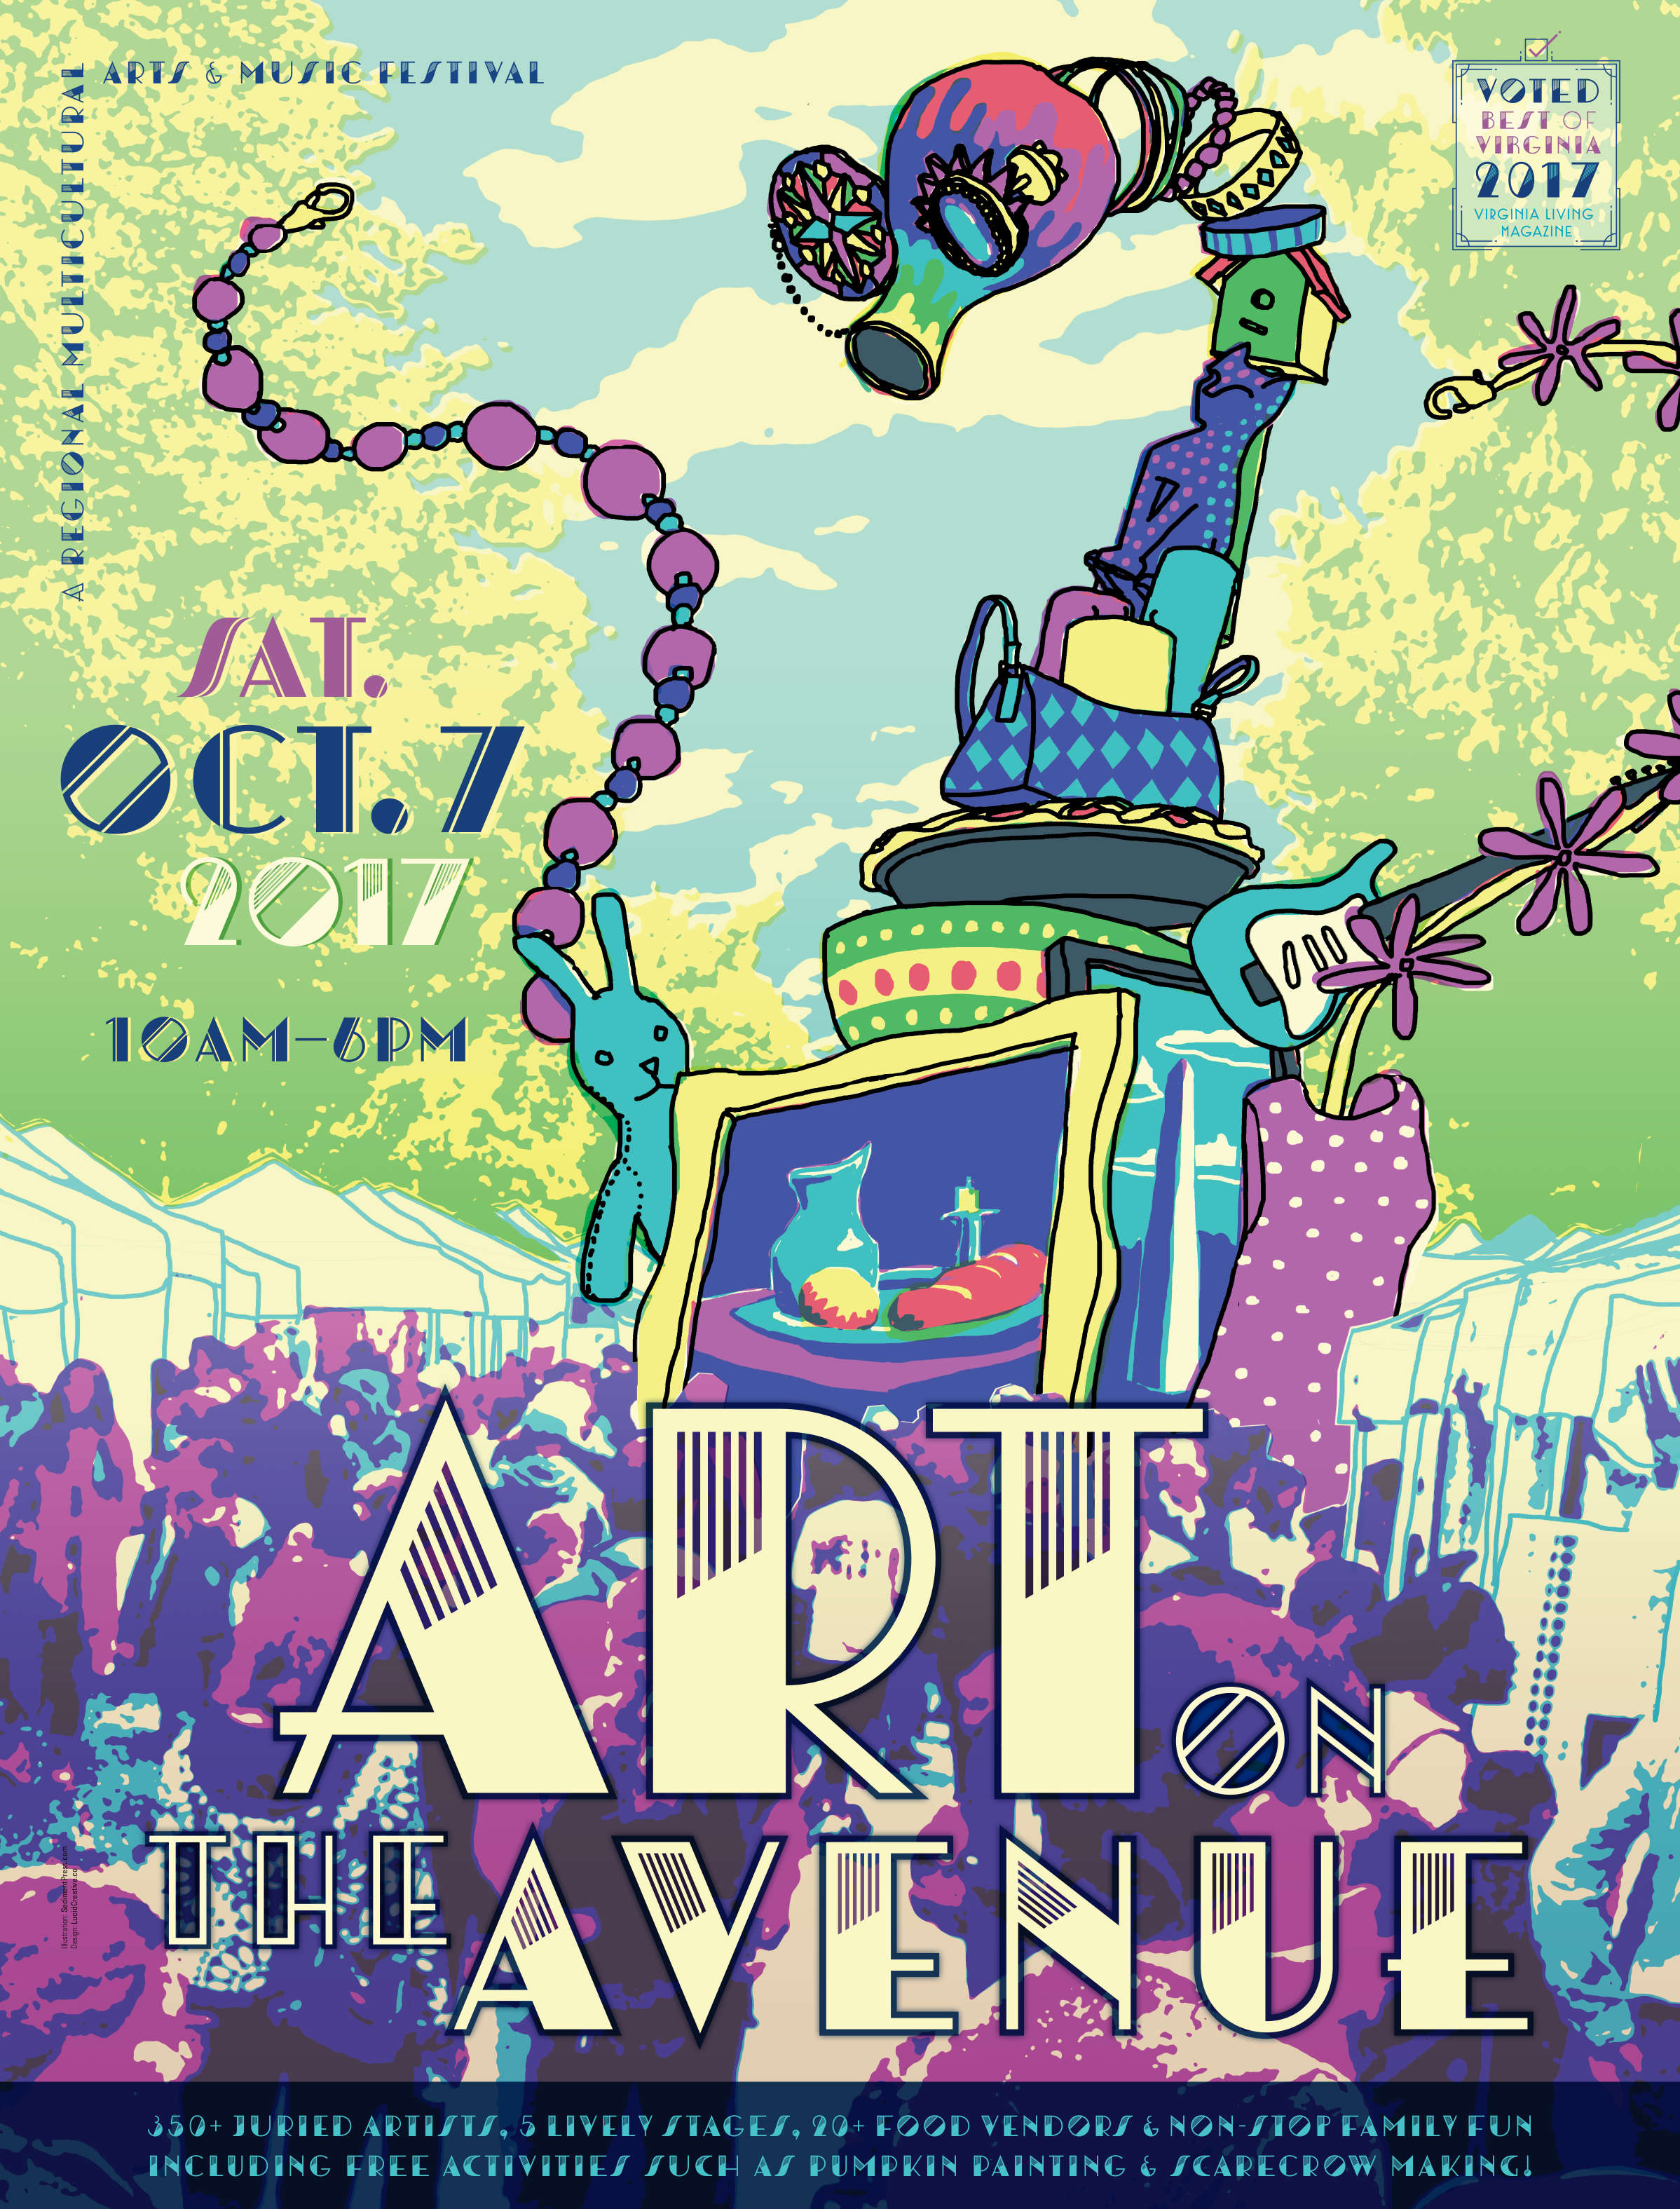 Poster for Art on the Avenue festival 2017. A giant monster made of arts and crafts looms over the crowded street.